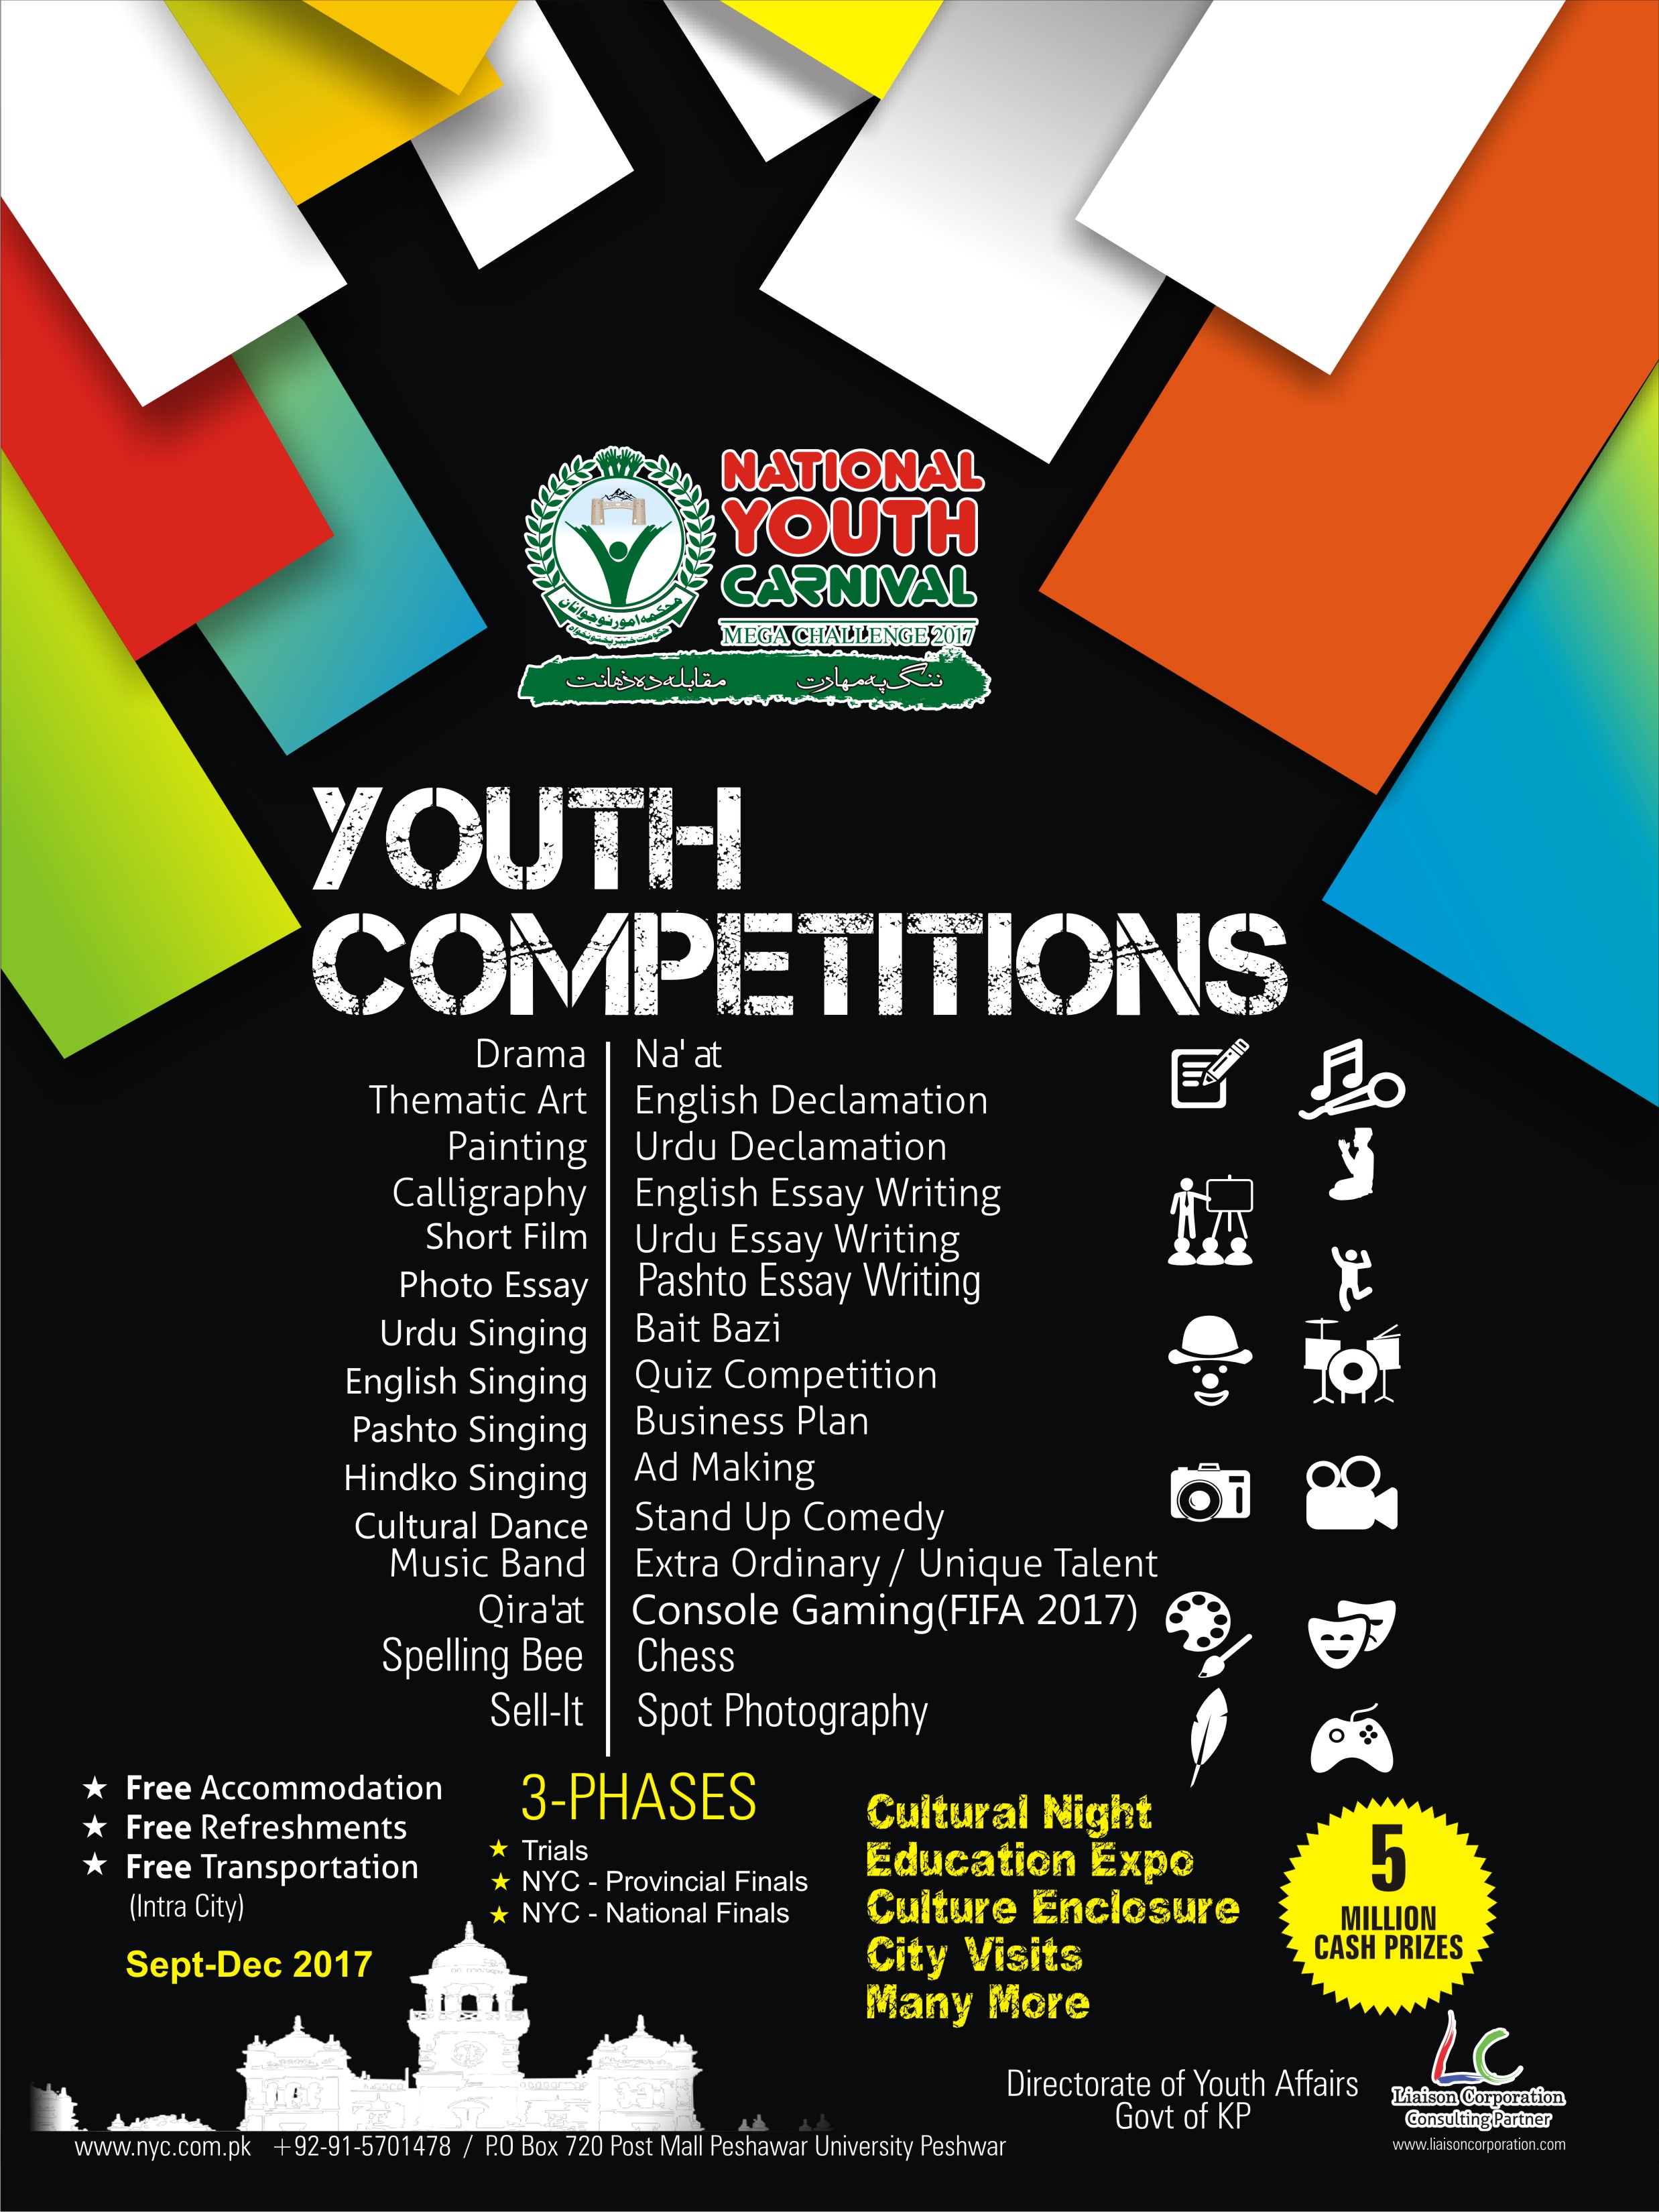 National Youth Carnival 2017: THE MEGA CHALLENGE